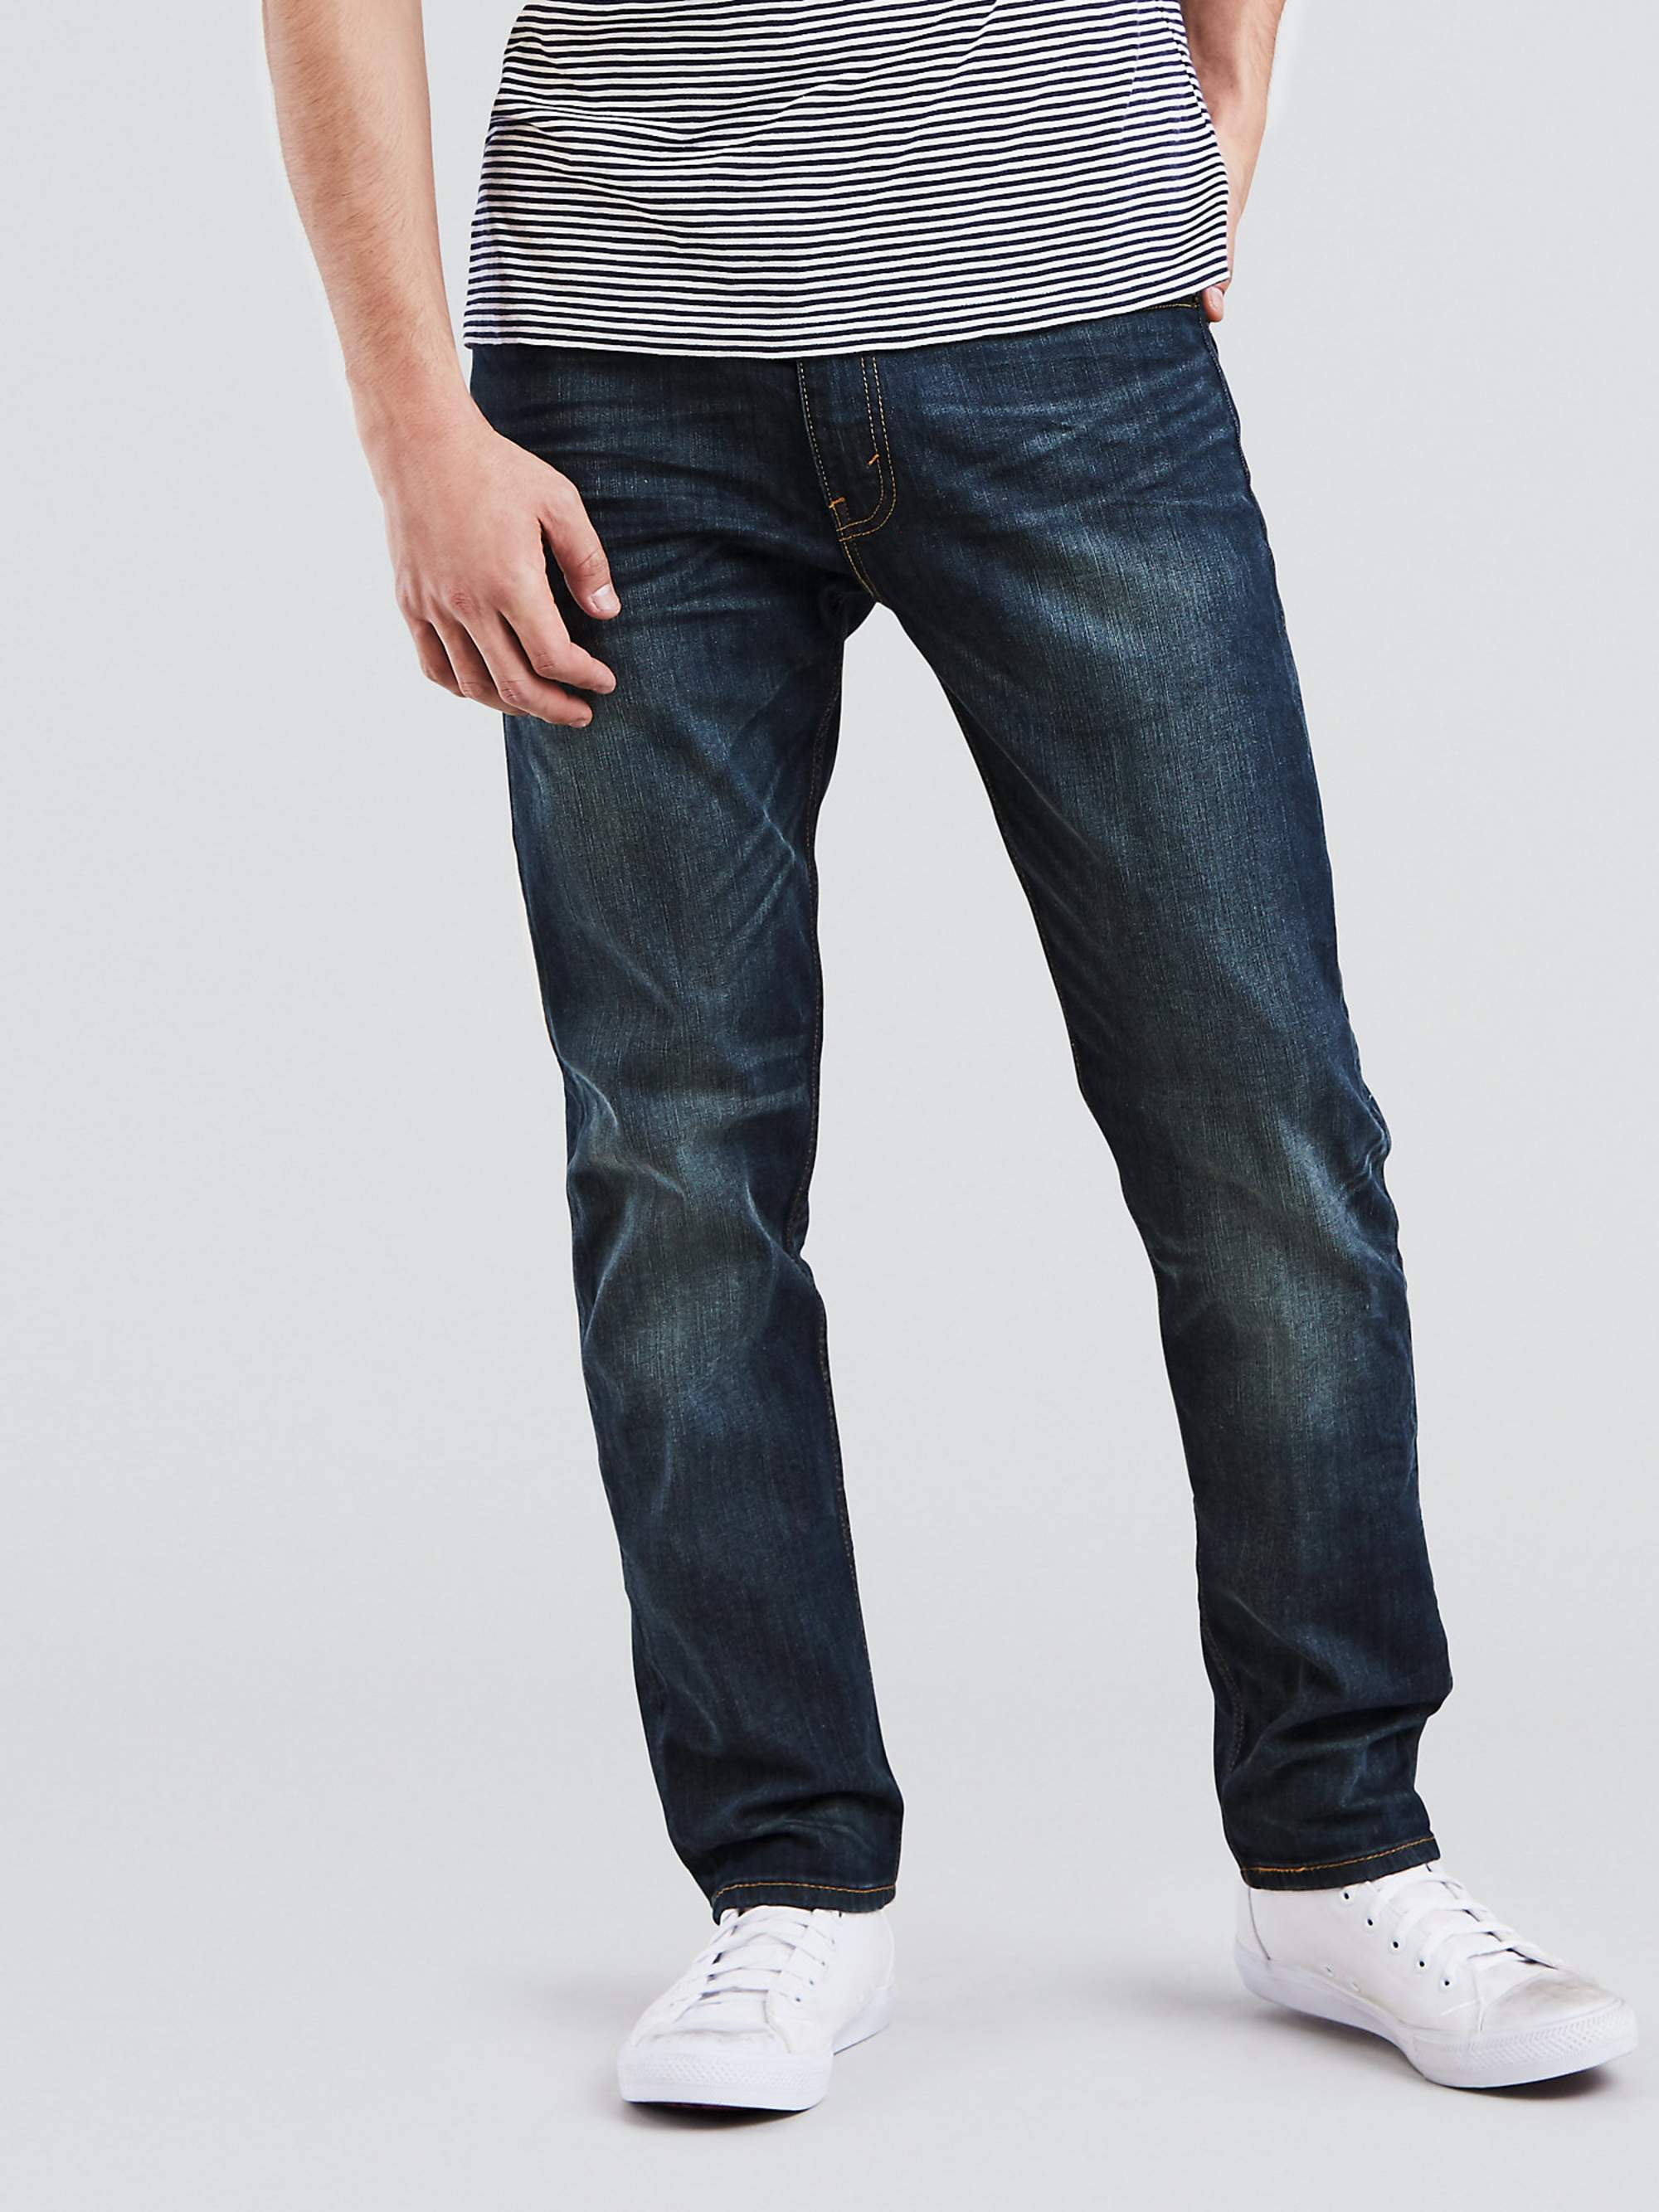 Levi's 502 Taper Jeans Homme